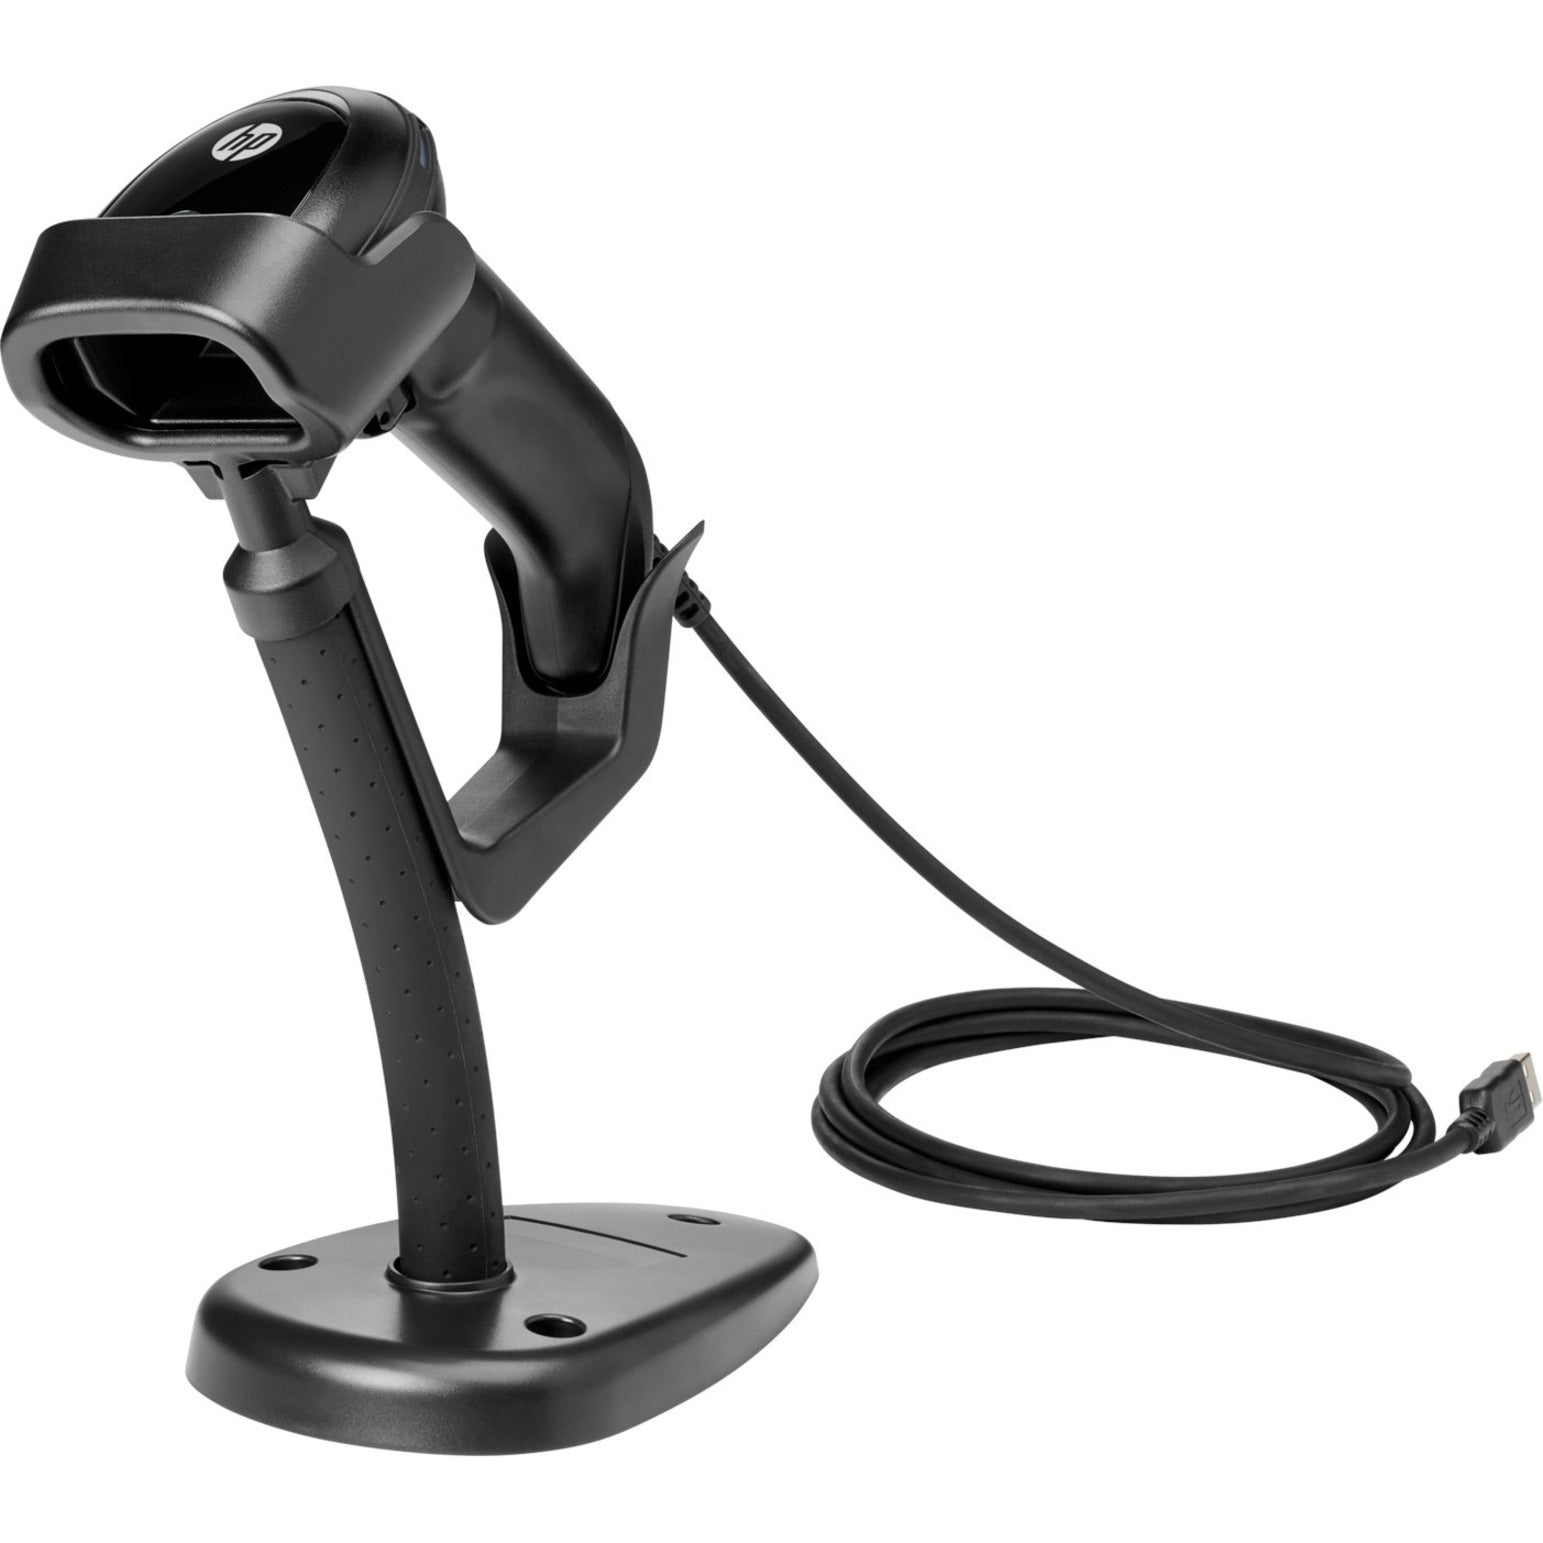 HP 5YQ08AT Engage Imaging Barcode Scanner II, Omni-directional 2D/1D Cable Barcode Scanner